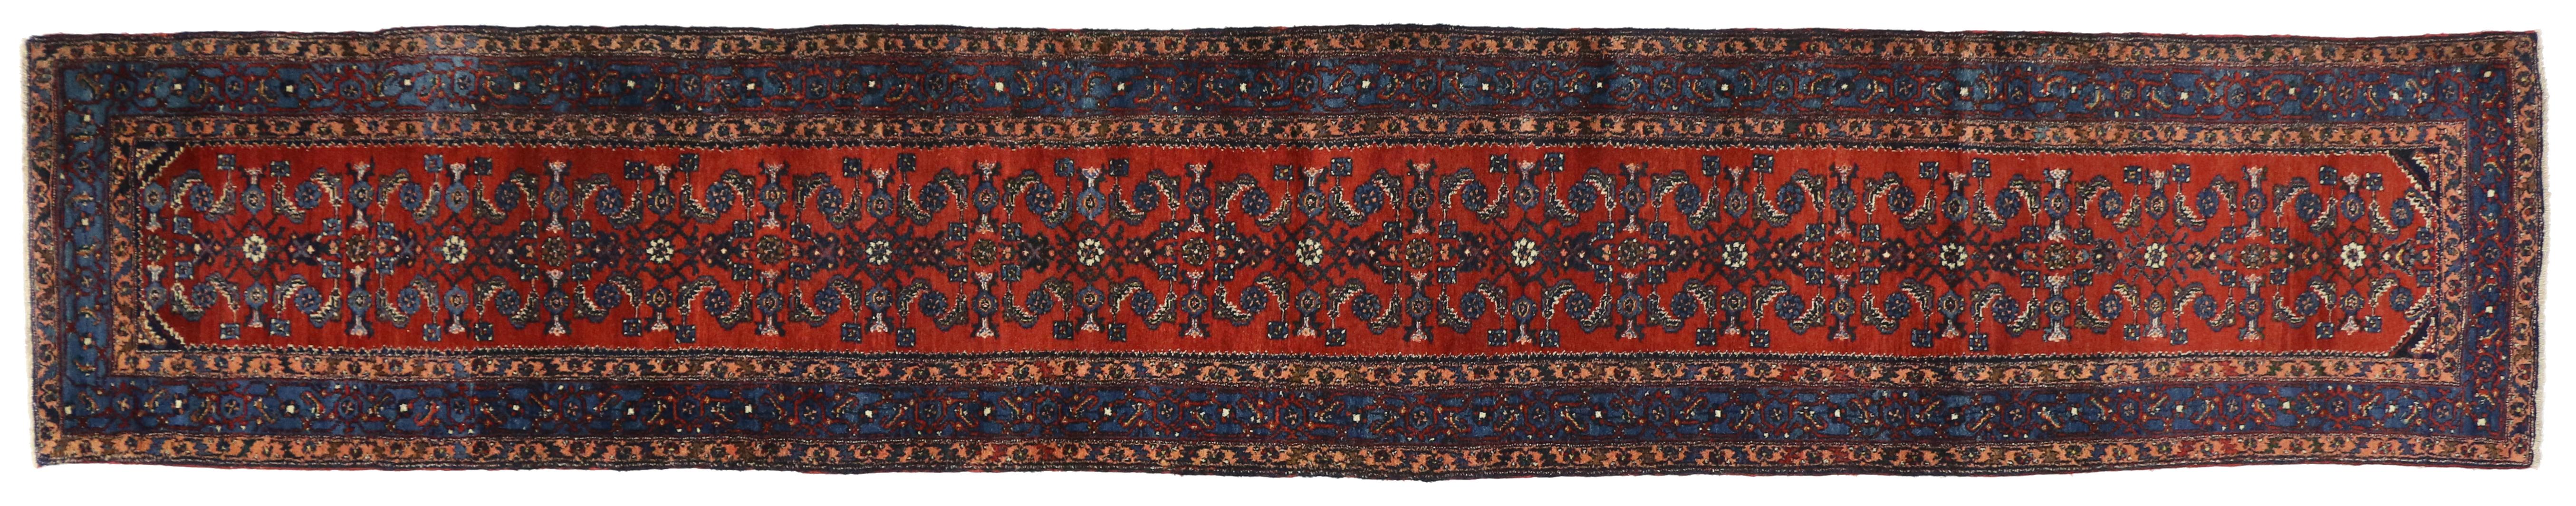 Antique Persian Malayer Long Runner with Elizabeth Tudor Style For Sale 7